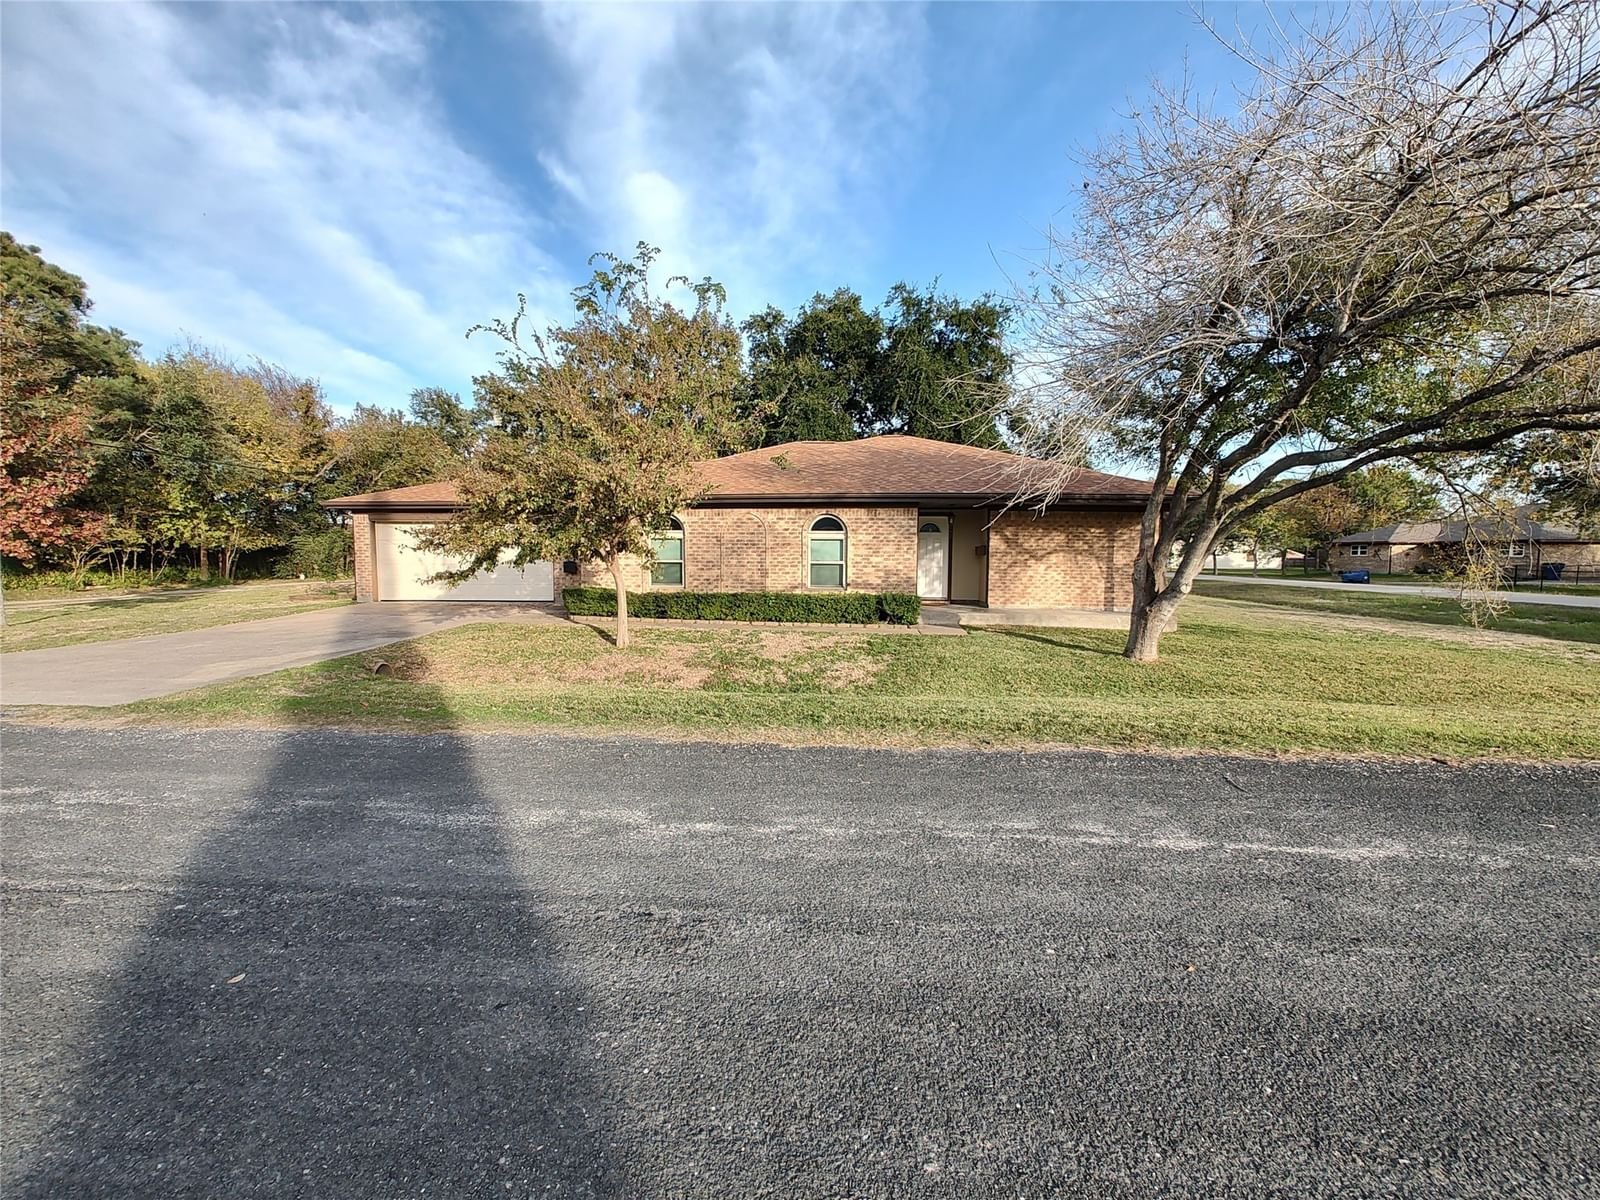 Real estate property located at 802 26th, Galveston, Texas City Heights Sub 1, Texas City, TX, US